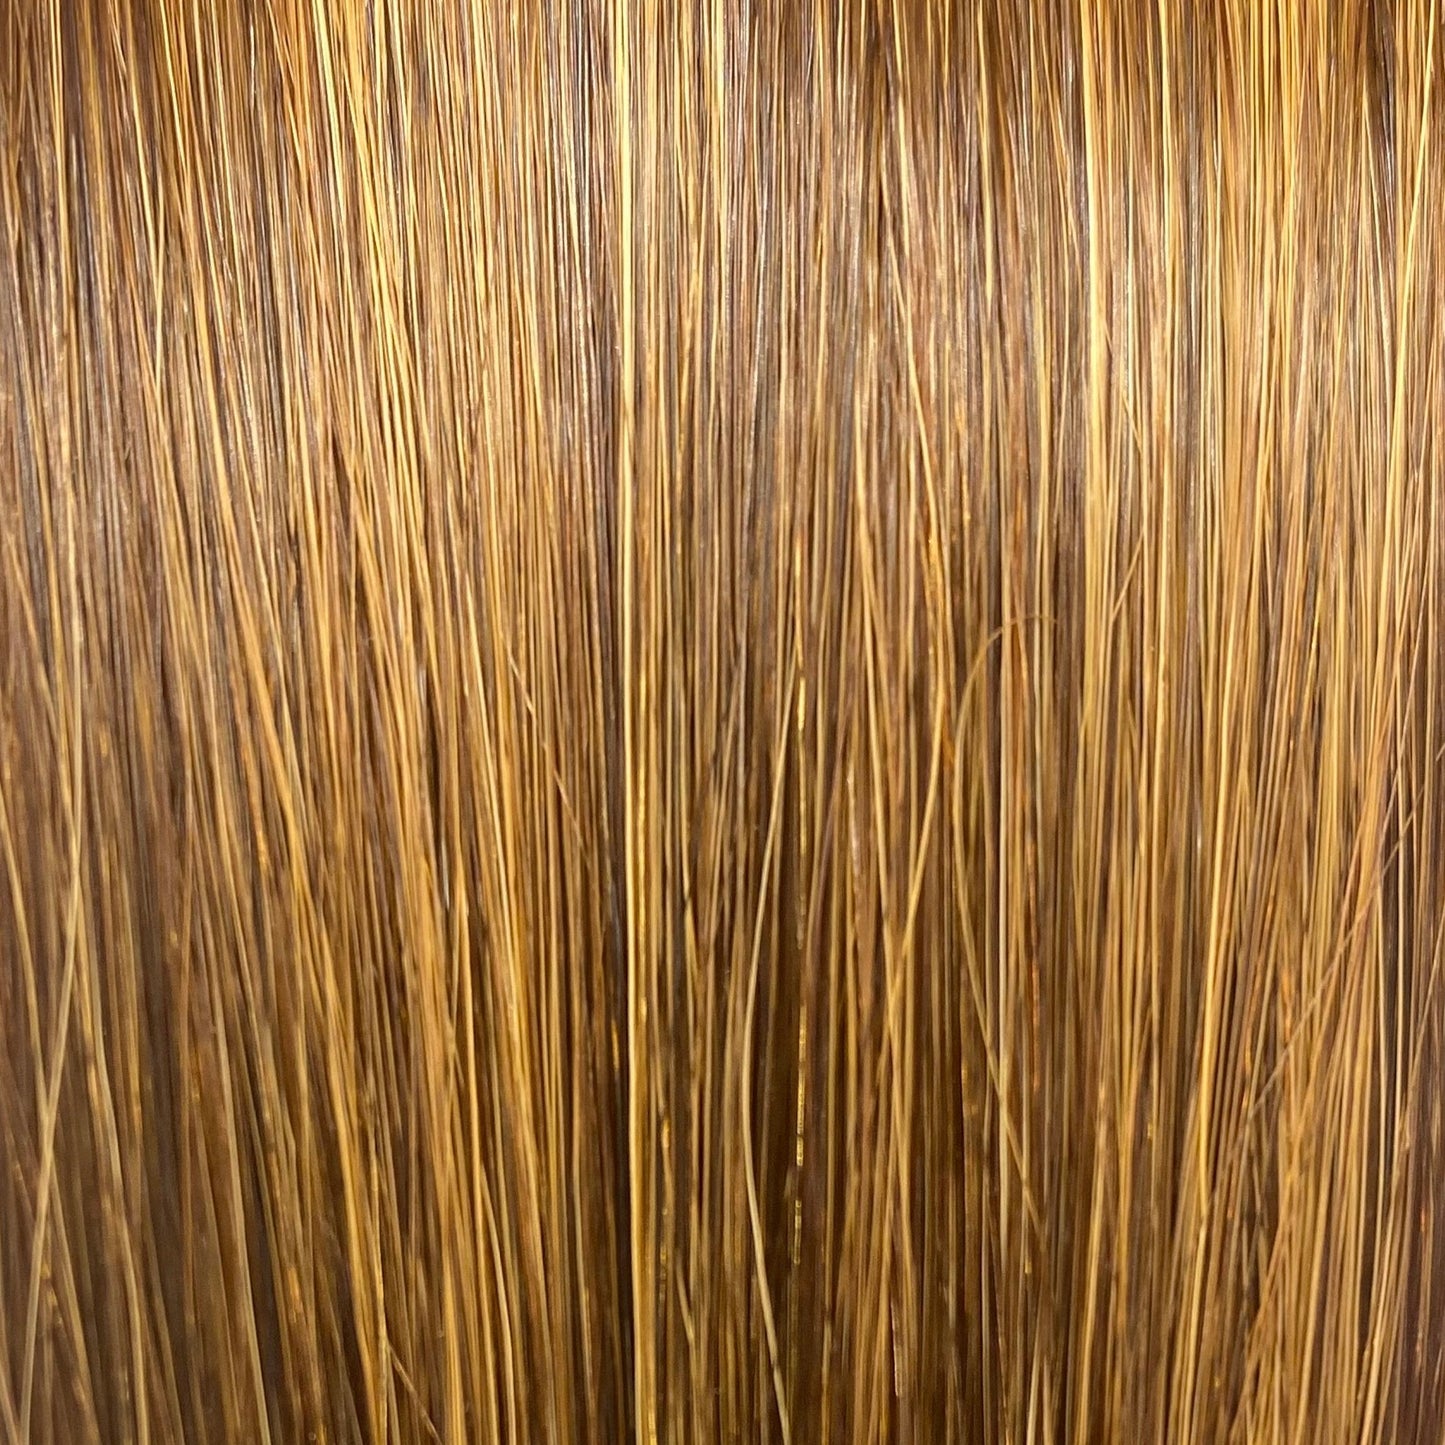 Fusion hair extensions #6/27 - 50cm/20 inches - Light Chestnut/Golden Blonde Highlight Fusion Euro So Cap 